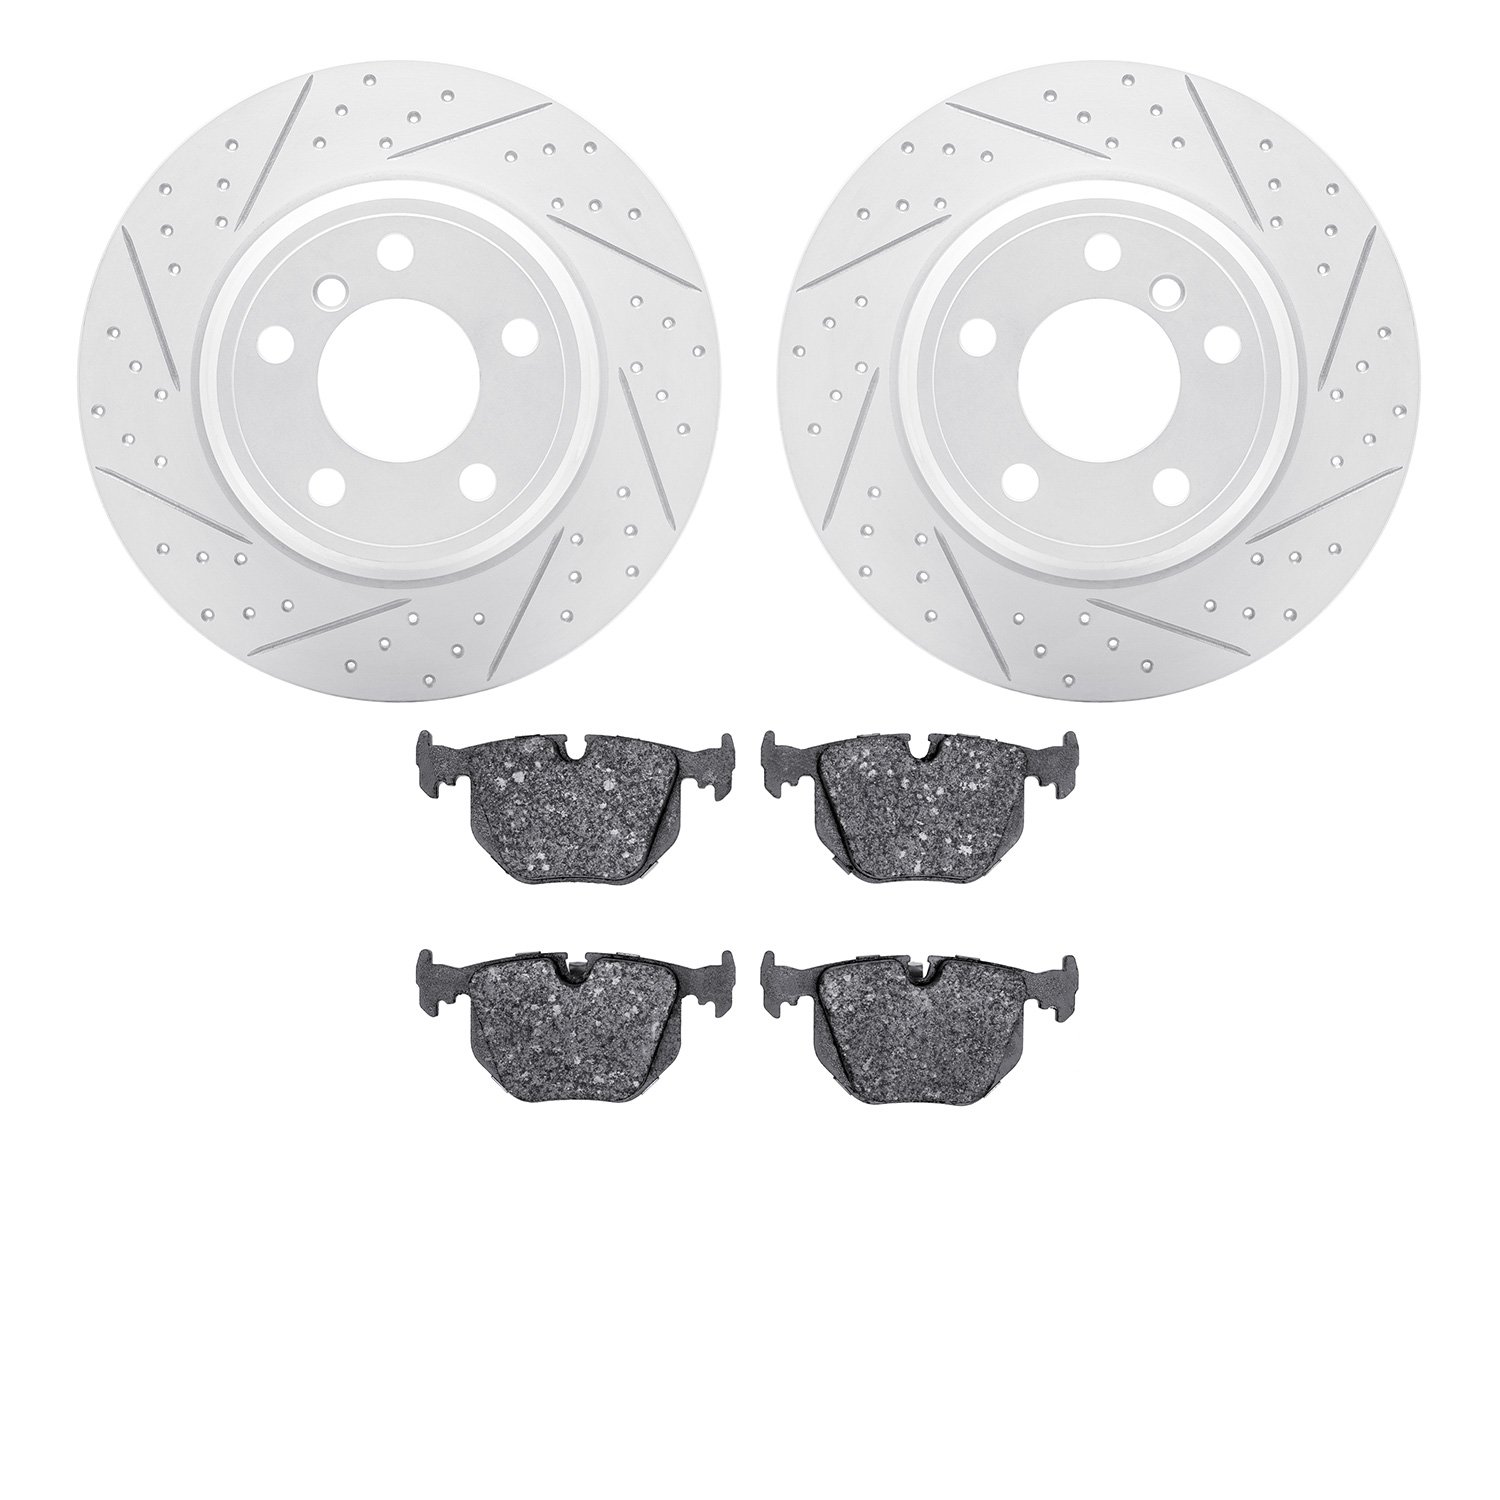 2502-31111 Geoperformance Drilled/Slotted Rotors w/5000 Advanced Brake Pads Kit, 2000-2006 BMW, Position: Rear